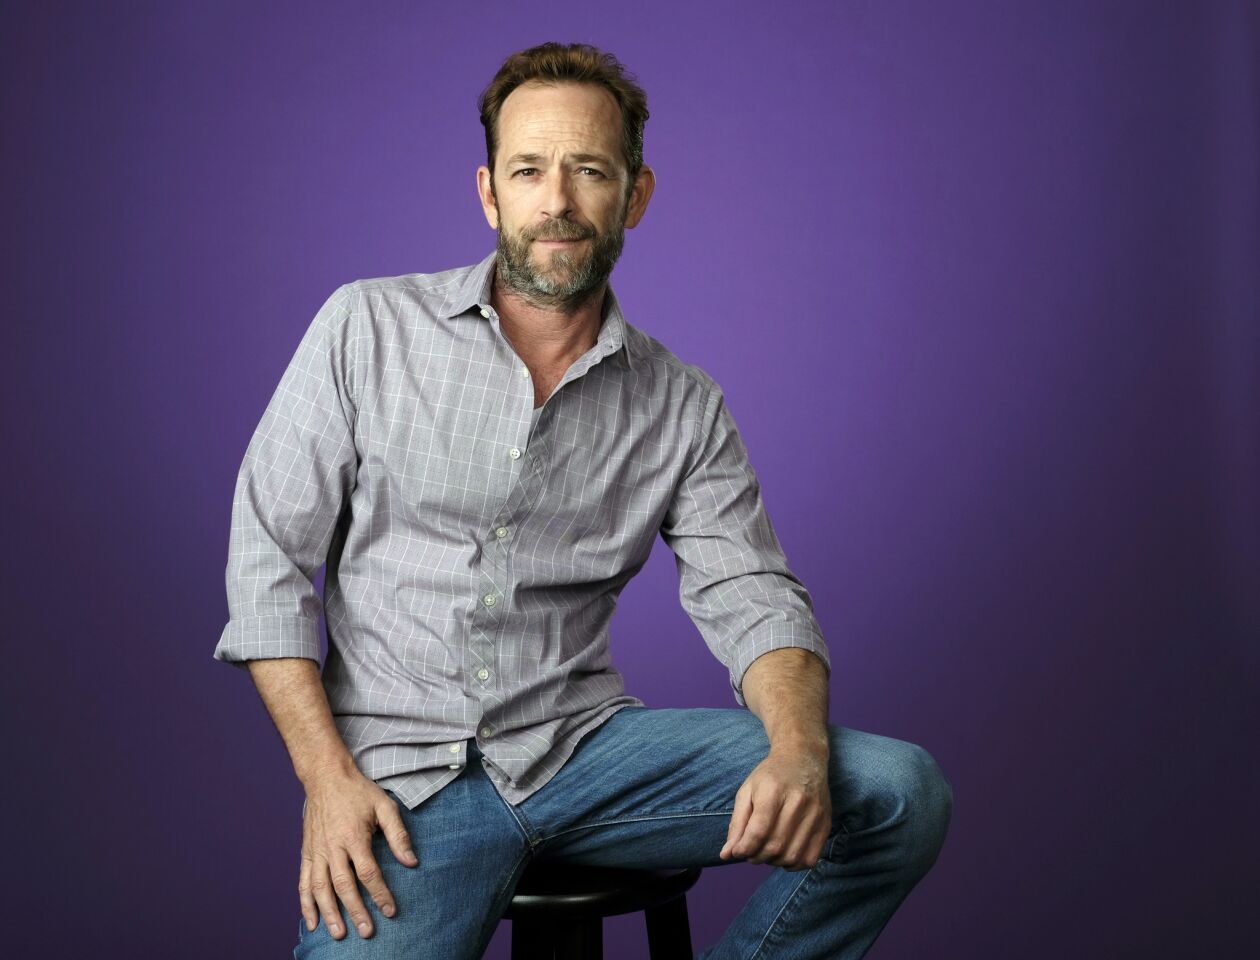 In this Aug. 6, 2018, file photo, Luke Perry of the CW series "Riverdale" poses for a portrait during the 2018 Television Critics Assn. summer press tour in Beverly Hills.